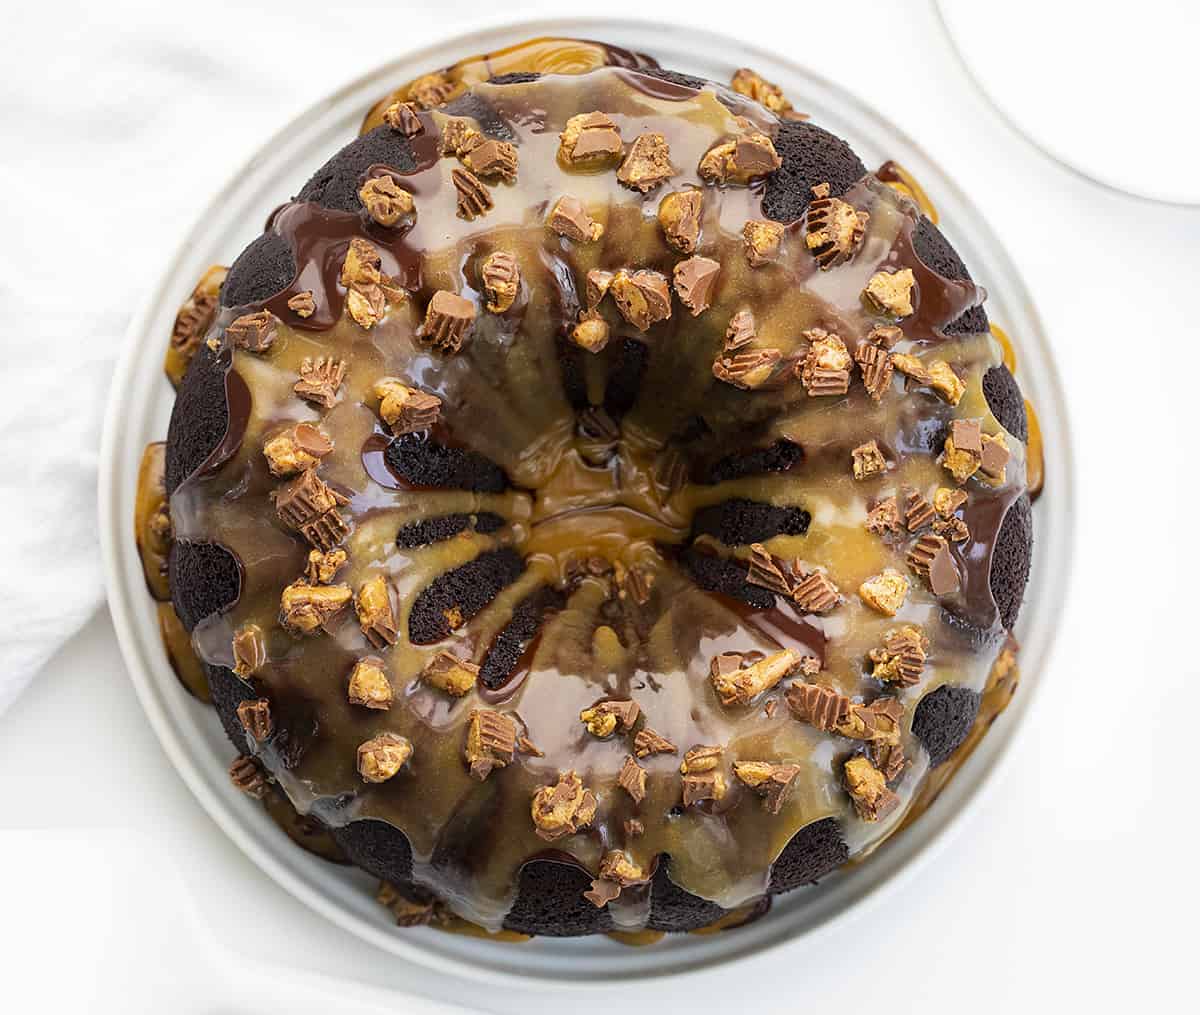 Chocolate Peanut Butter Bundt Cake on White Cake Plate From Overhead